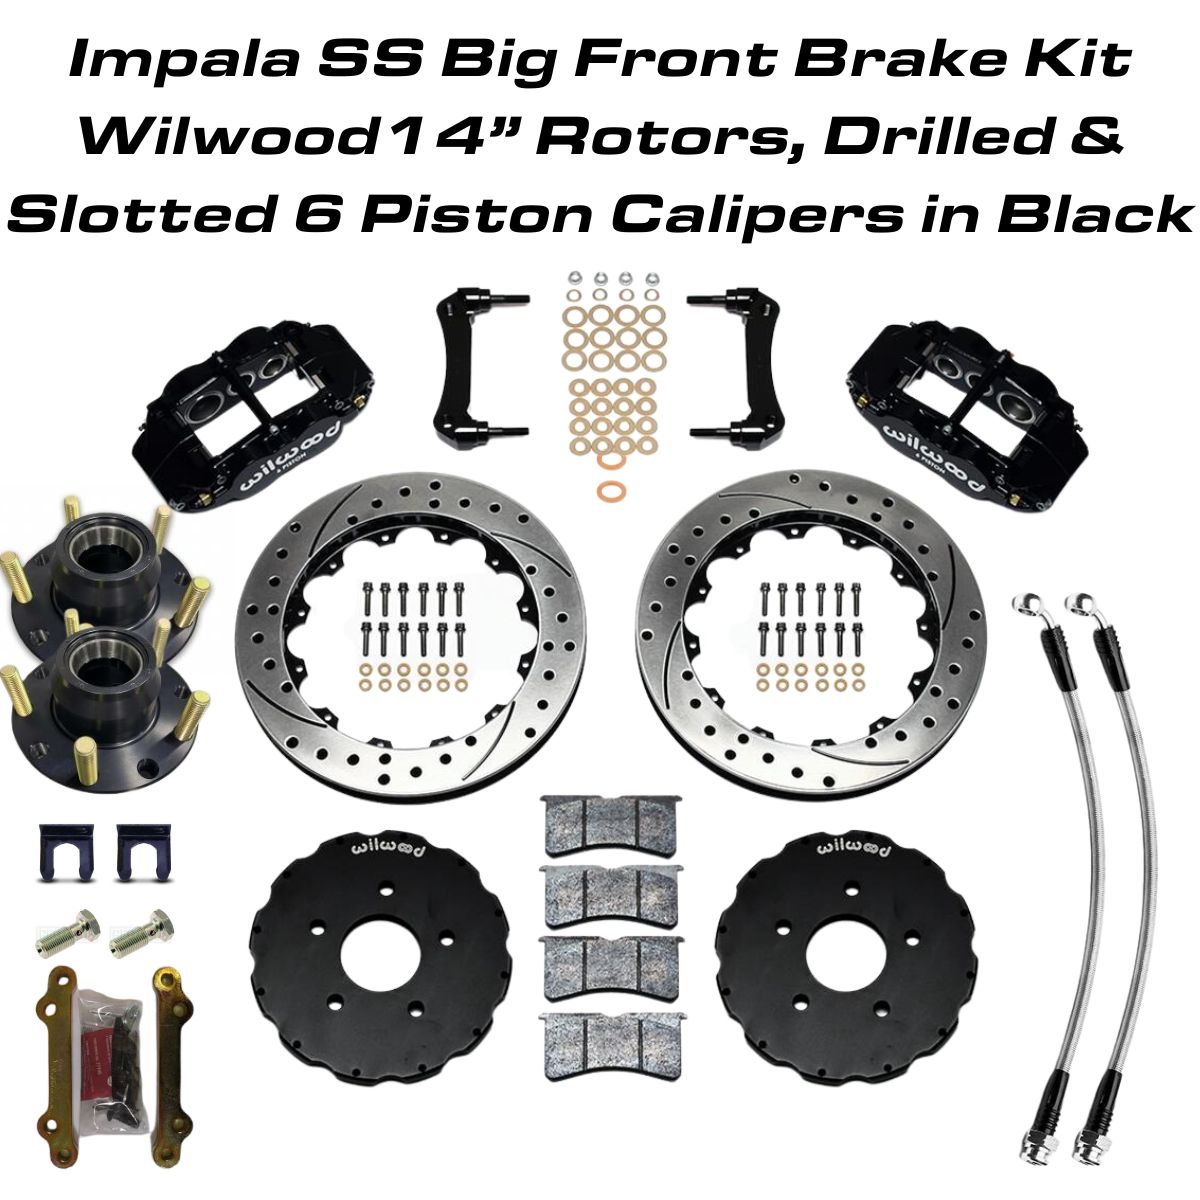 Impala SS Big Front Brake Kit, 14 Inch Wilwood Rotors, 6 Piston Superlite Calipers - Drilled and Slotted, Black Calipers